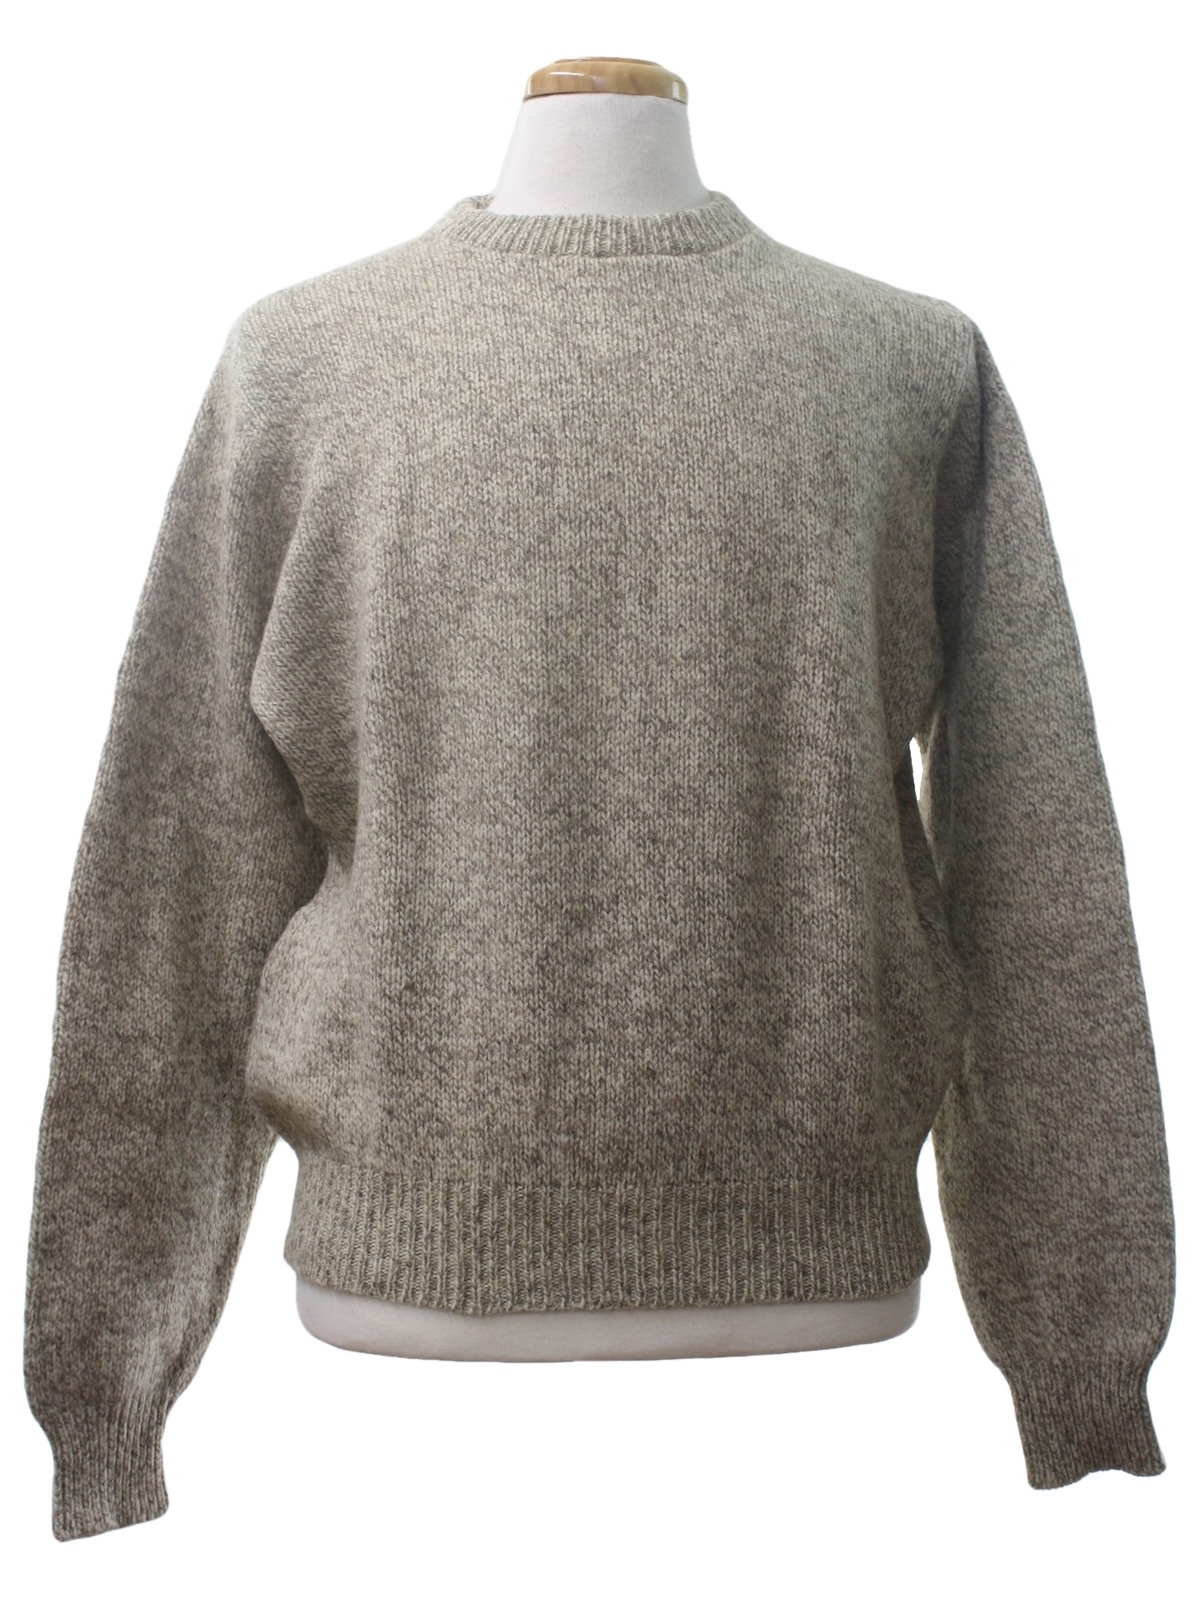 Retro Eighties Sweater: 80s -Lands End- Mens heathered taupe and winter ...